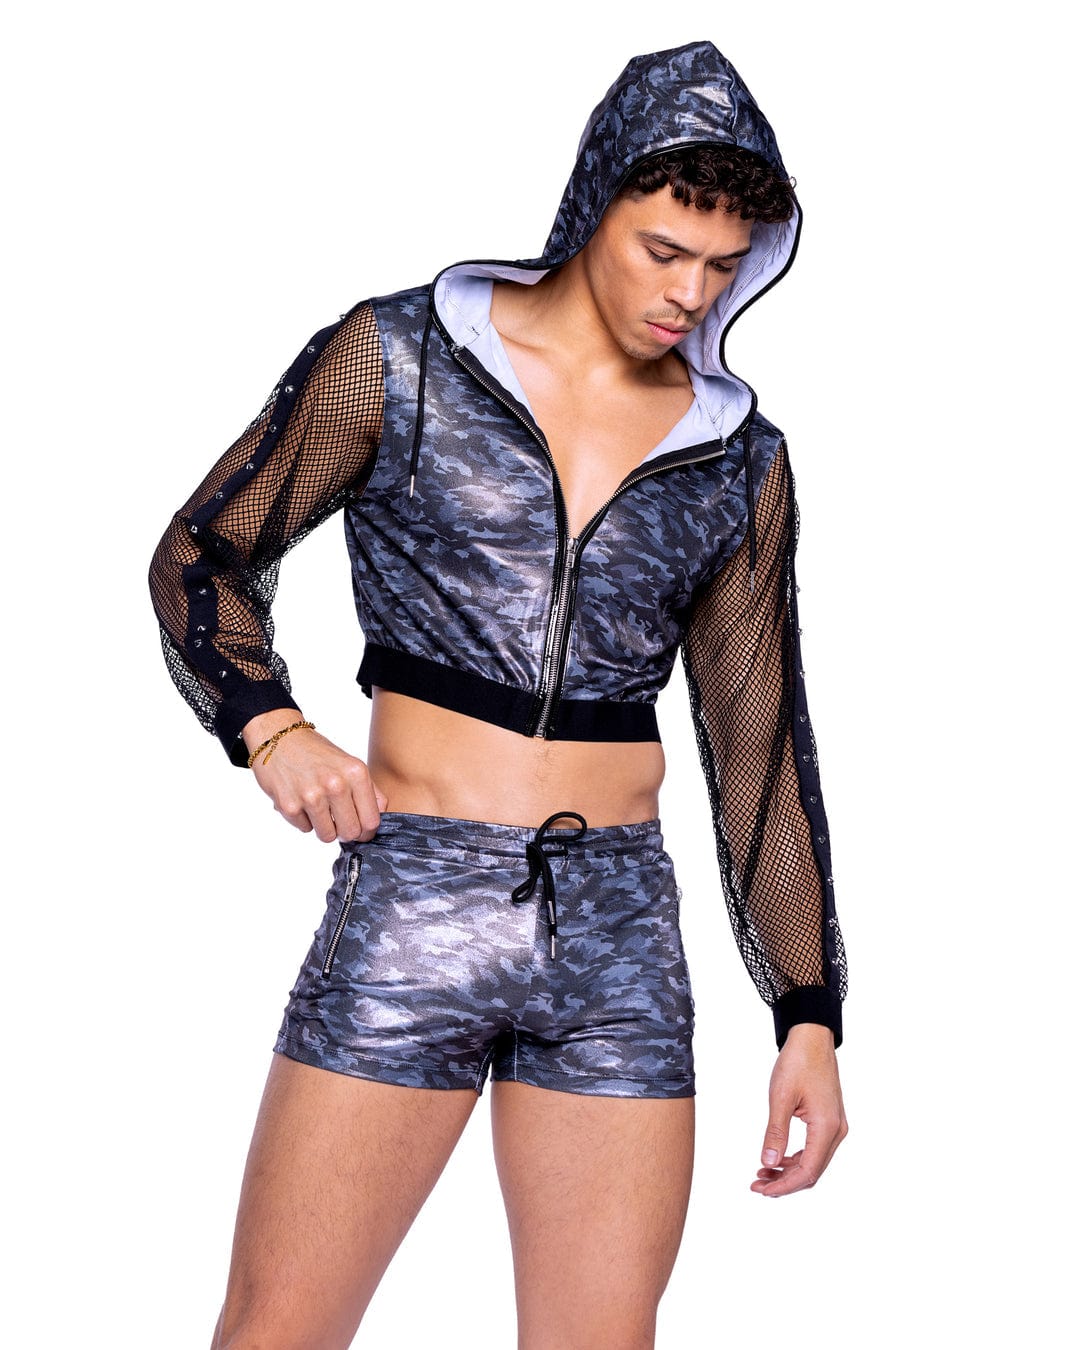 Roma Black/Grey / S Sexy Men's Shimmer Camouflauge Shorts 6526-Blk/Grey-S 2024 Sexy Men's Shimmer Camouflauge Shorts Rave Wear Apparel & Accessories > Costumes & Accessories > Costumes